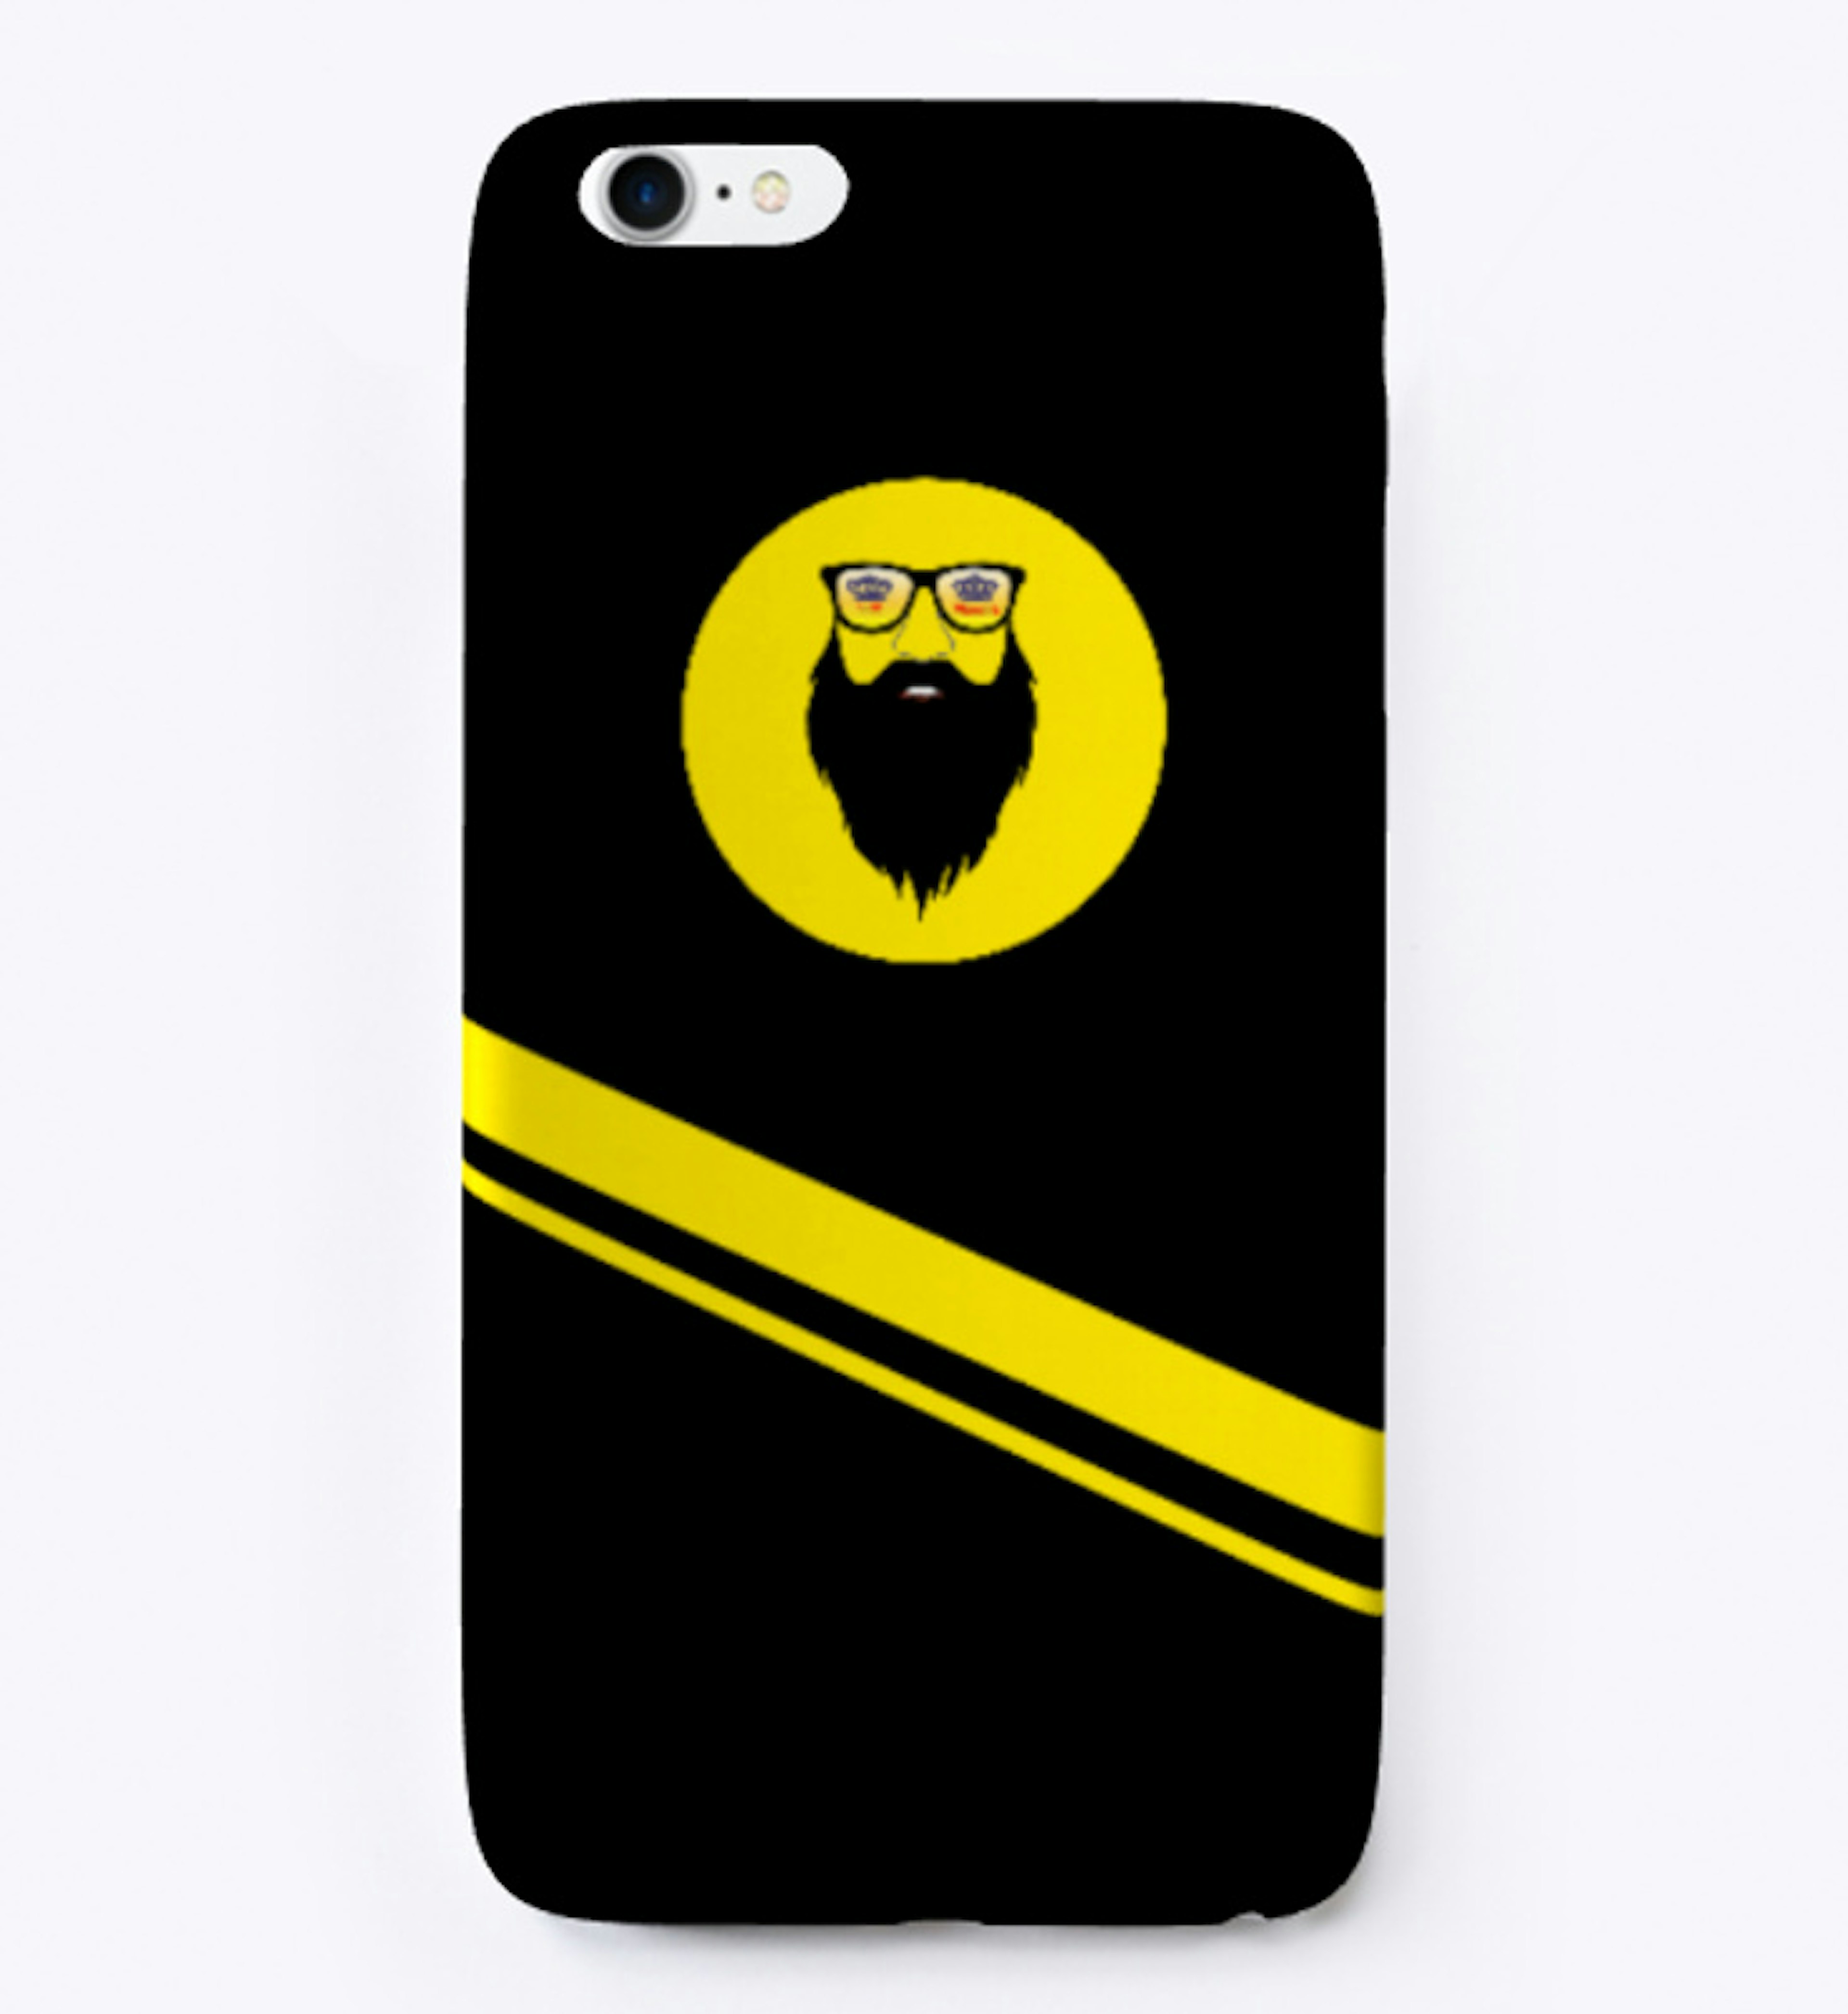 Moshiach Case Affordable in 25 Colors